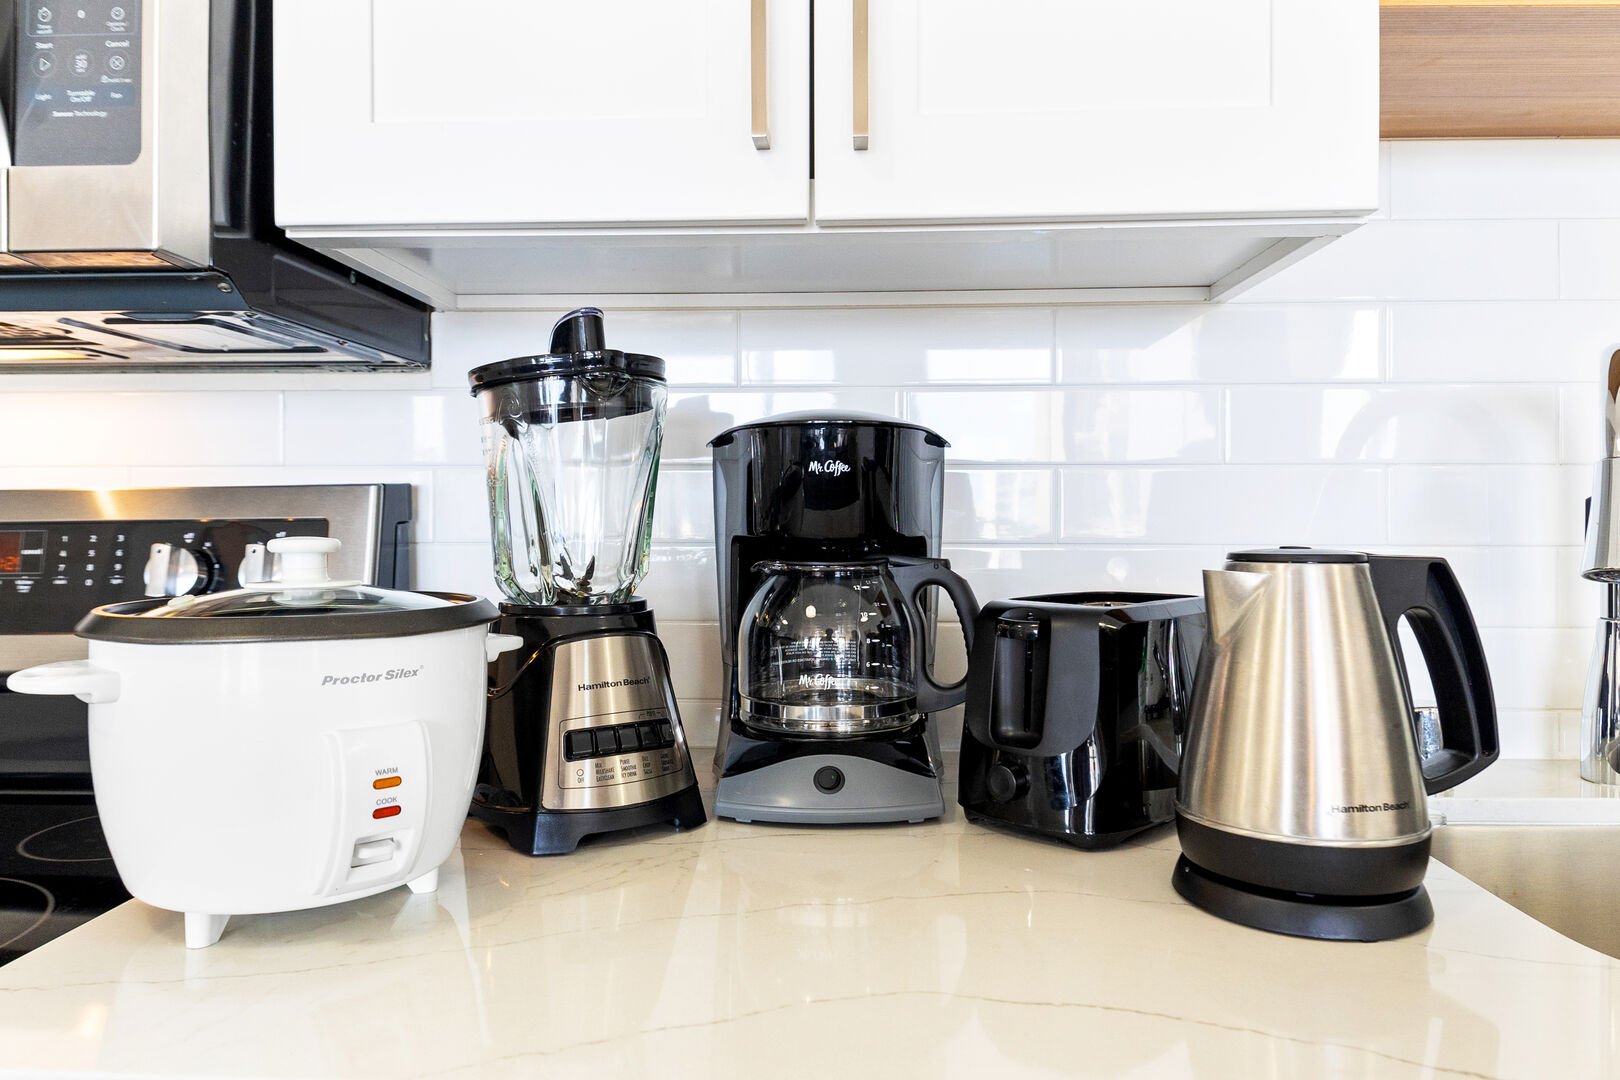 Available appliances include rice cooker, blender, coffee maker, toaster, and kettle